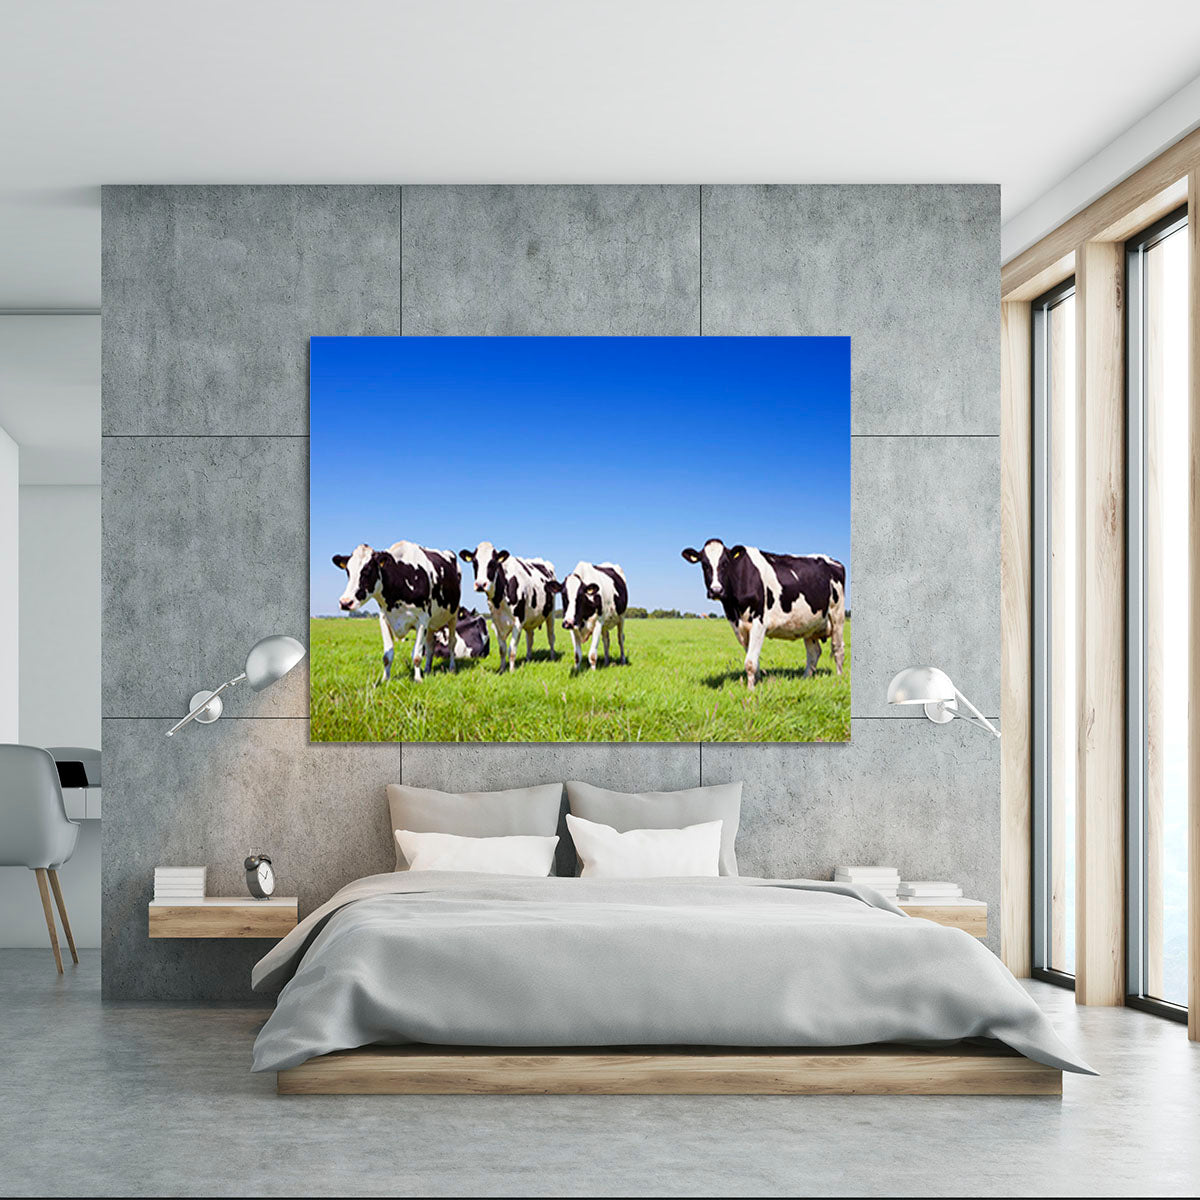 Black and white cows in a grassy field Canvas Print or Poster - Canvas Art Rocks - 5